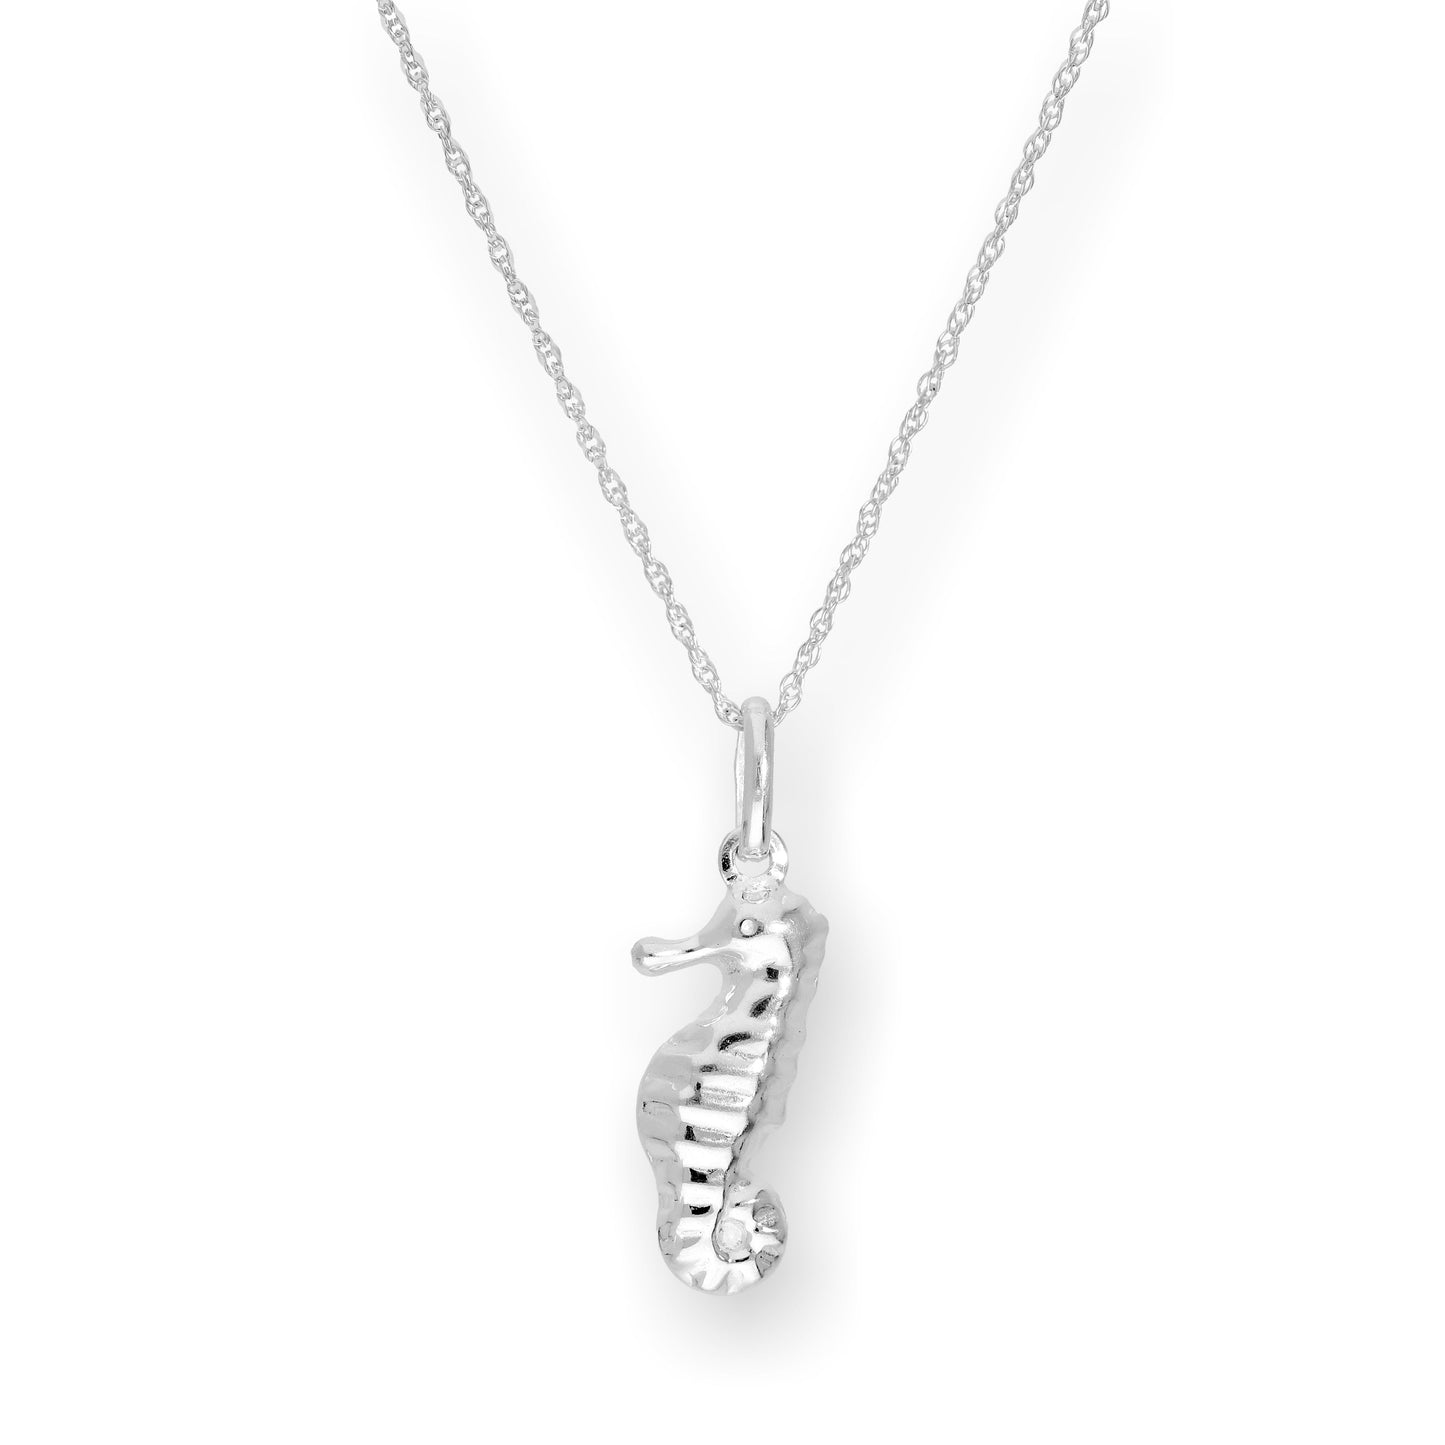 Sterling Silver Seahorse Pendant Necklace 16 - 22 Inches